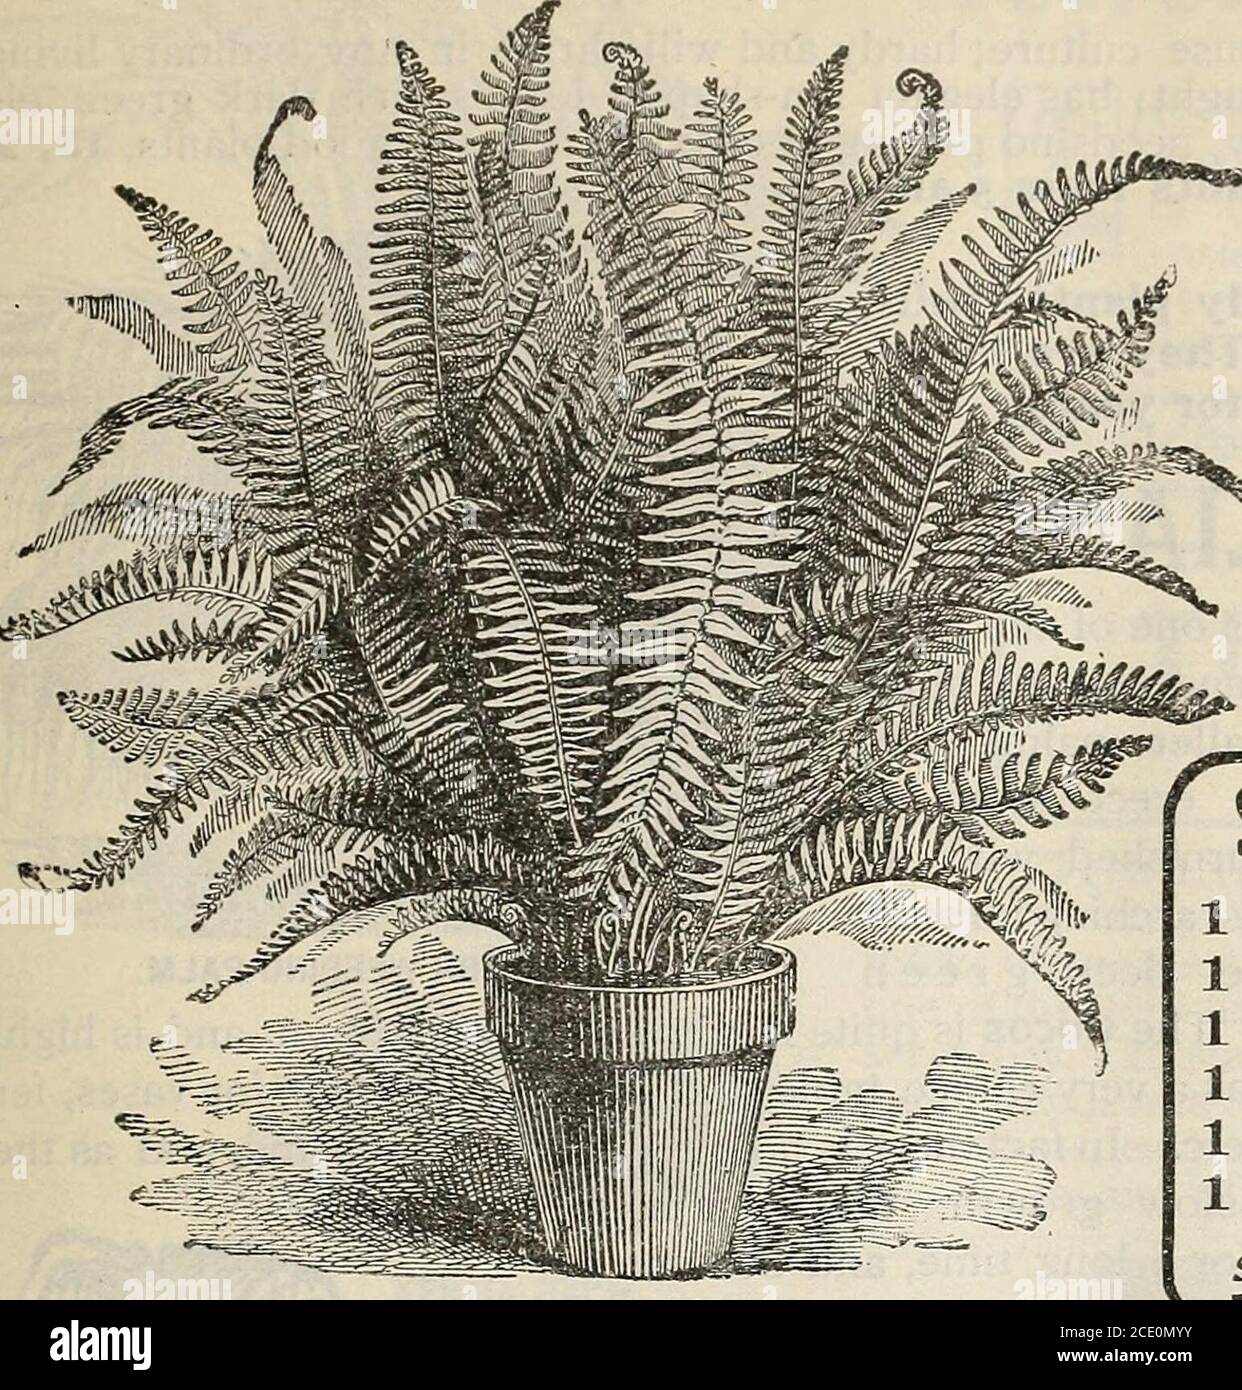 . New floral guide : autumn 1903 . BLACK CALLA (ARUM SANCTUM) New Floral Guide—Autumn, 1903. 33 THE BOSTON FERN ^phrqempis. EX ALT ATA This is one of the finest and best Ferns forgrowing in pots, vases and baskets ; will dowell planted in a shady border during Sum-mer, and when lifted and taken indoors,makes a splendid window and house plantduring Winter. The beautiful fronds growtwo to three feet long, and arch over in amost graceful manner. Very popularwherever known. Price, good strongf^« plants, 15, 20 and 25 cts. each,$1,50, $2.00 and $2.50 per doz.,postpaid; larger size, 40, 50, 75 cts, Stock Photo